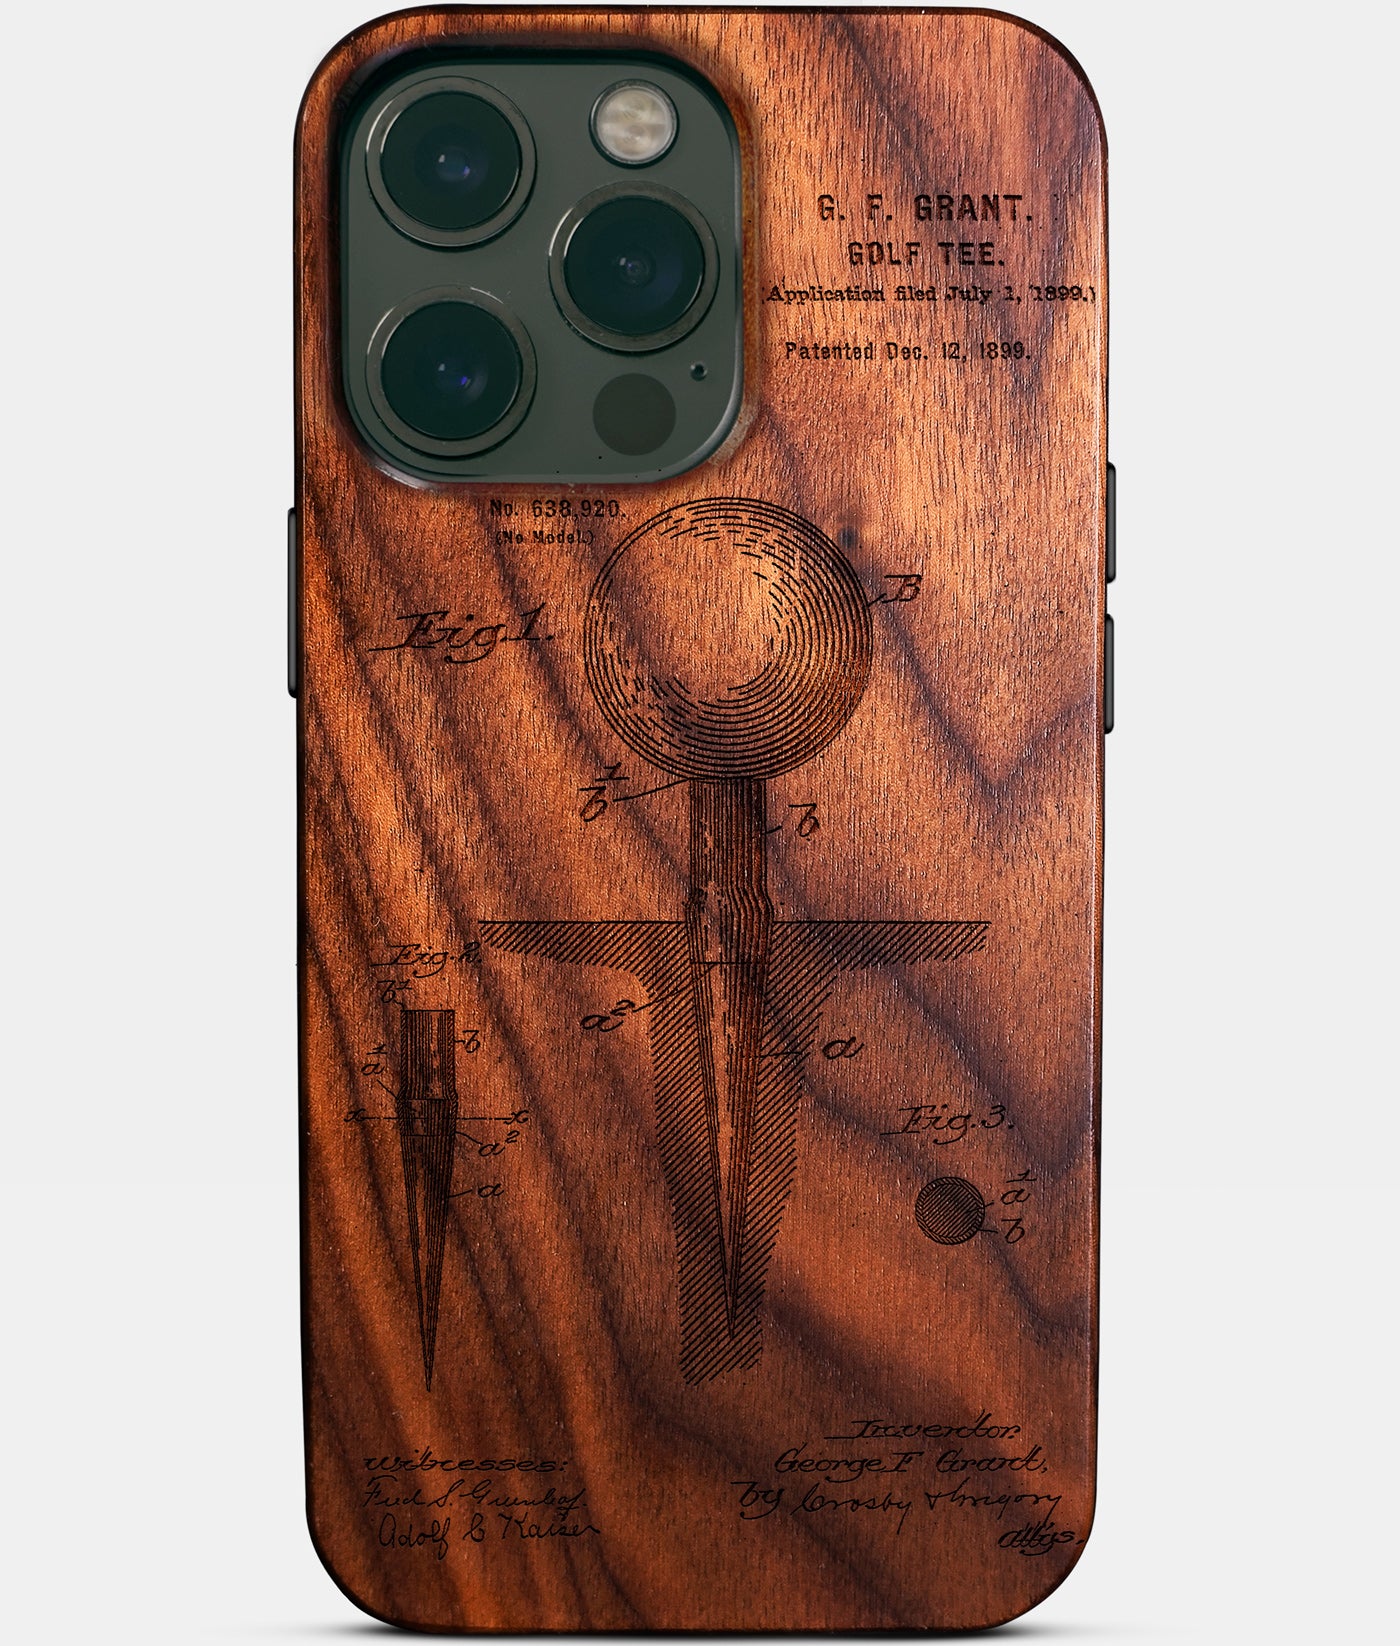 Custom Golf iPhone 14 Pro Max Cases Golf Tee Personalized Golf Gifts For Men 2022 Best Golf Christmas Gifts Best Country Club Gifts Carved Wood Unusual Golf Gift For Him Monogrammed iPhone 14 Pro Max Covers